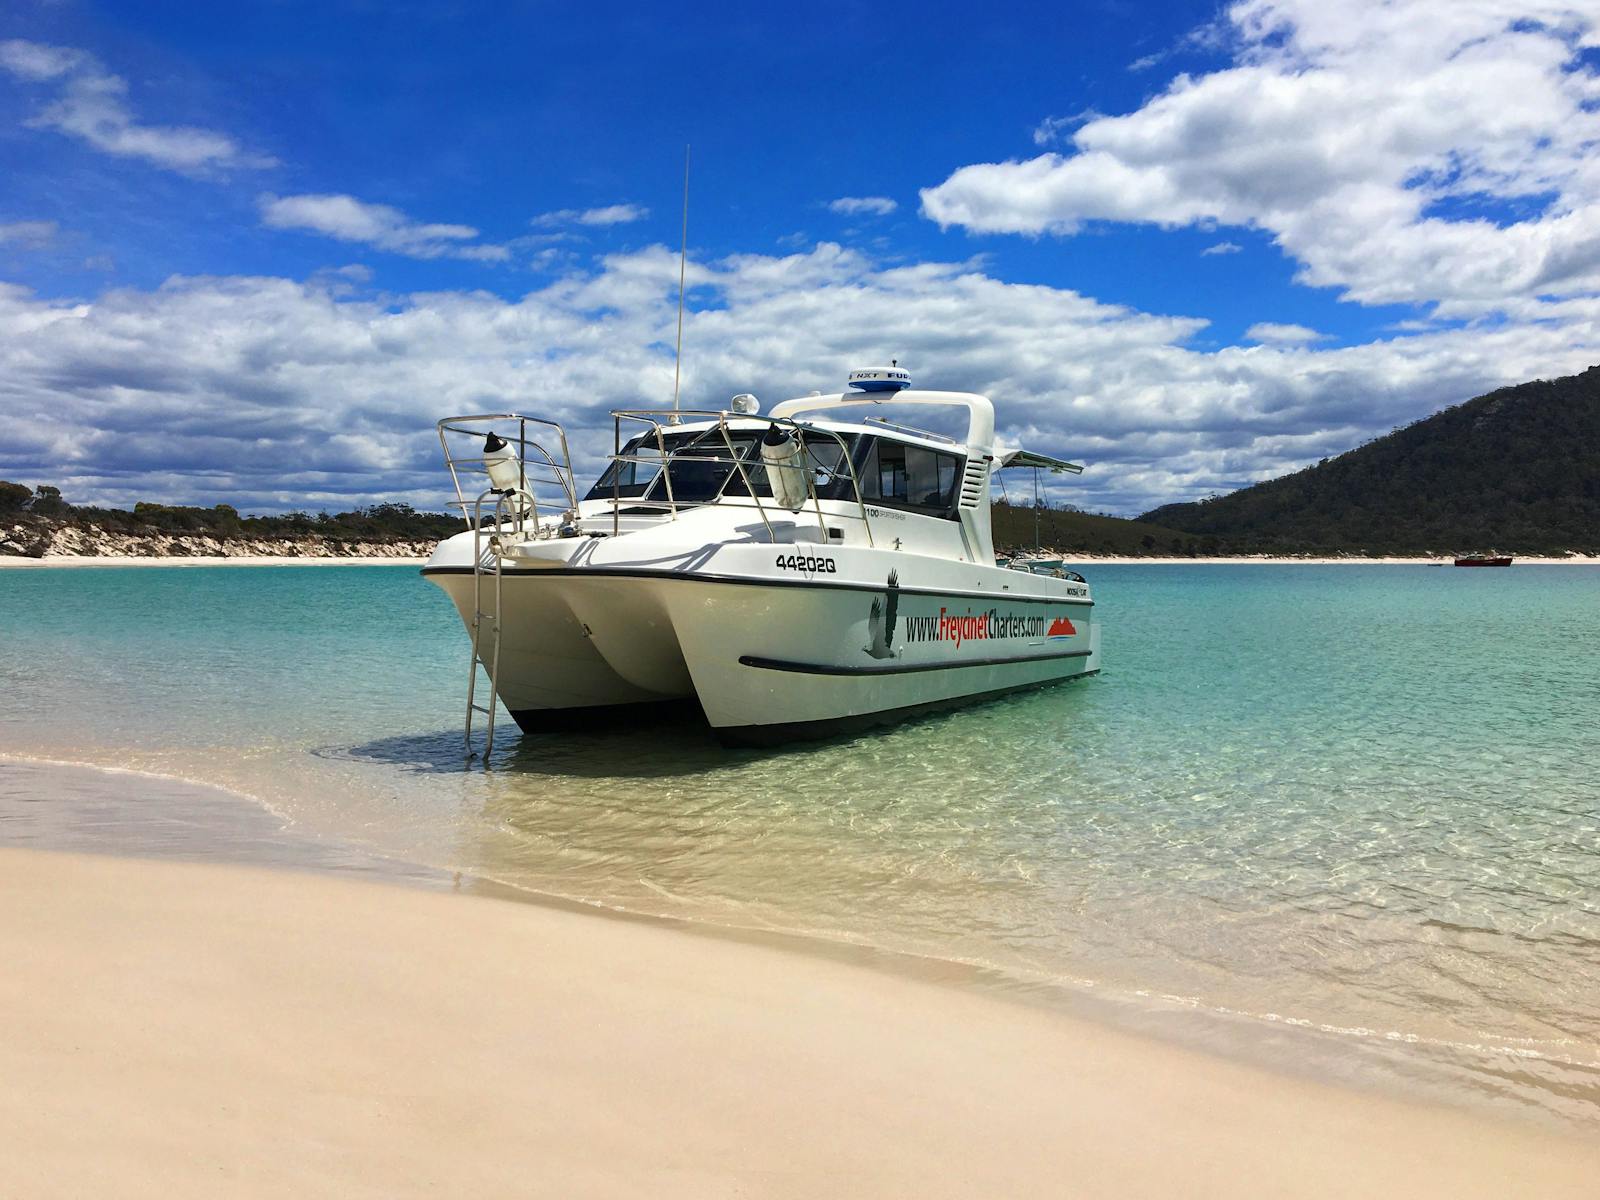 Landing on Wineglass Bay, the water is crystalline the sand is pearl-like